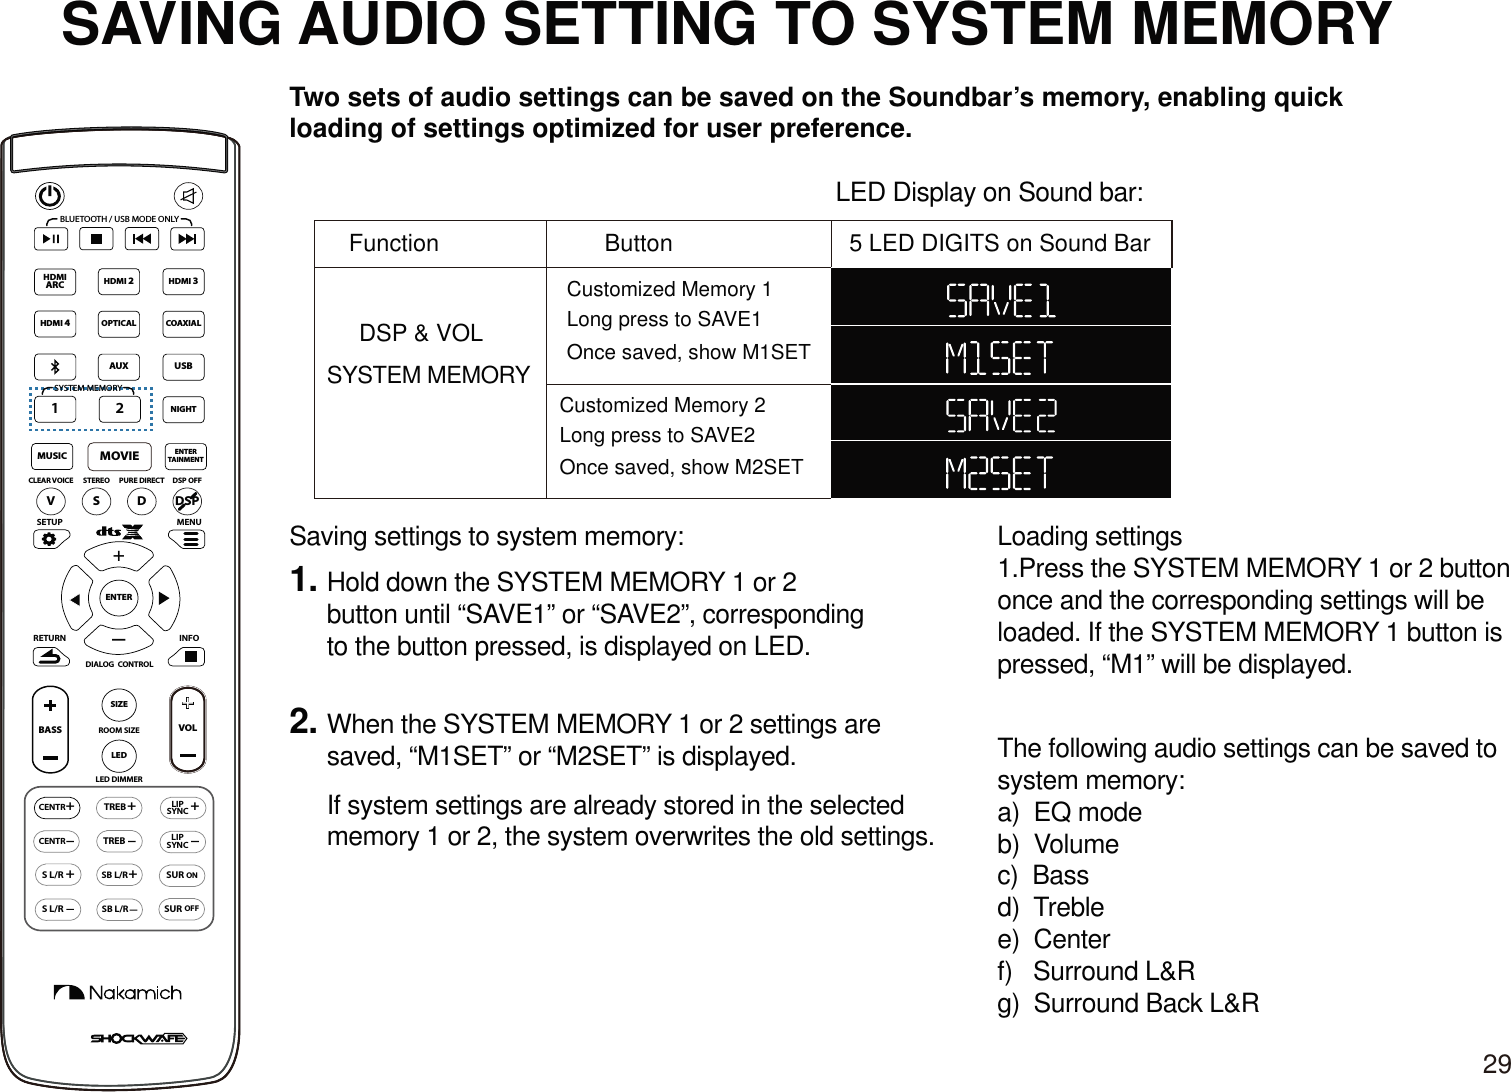 SAVING AUDIO SETTING TO SYSTEM MEMORY+SETUP MENUENTERCENTR++LEDSIZERETURN INFOLED DIMMERVOL+TREBCENTRONSURSUROFFTREB+LIPSYNC+SB L/RSB L/R+S L/RS L/RLIPSYNCBASSROOM SIZEDIALOG  CONTROLVSDCLEAR VOICE STEREO PURE DIRECT DSP OFFBLUETOOTH / USB MODE ONLYSYSTEM MEMORYDSPHDMI 2HDMI 3MOVIEENTERTAINMENTMUSICOPTICAL2AUXHDMIARCHDMI 4COAXIALUSB1NIGHTTwo sets of audio settings can be saved on the Soundbar’s memory, enabling quick loading of settings optimized for user preference. Function Button 5 LED DIGITS on Sound BarDSP &amp; VOLCustomized Memory 1Long press to SAVE1Once saved, show M1SETCustomized Memory 2Long press to SAVE2Once saved, show M2SETSYSTEM MEMORYLED Display on Sound bar:Saving settings to system memory:Hold down the SYSTEM MEMORY 1 or 2 button until “SAVE1” or “SAVE2”, corresponding to the button pressed, is displayed on LED.1.2. When the SYSTEM MEMORY 1 or 2 settings are saved, “M1SET” or “M2SET” is displayed.If system settings are already stored in the selected memory 1 or 2, the system overwrites the old settings.Loading settings1.Press the SYSTEM MEMORY 1 or 2 button once and the corresponding settings will be loaded. If the SYSTEM MEMORY 1 button is pressed, “M1” will be displayed.The following audio settings can be saved to system memory:a)  EQ modeb)  Volumec)  Bassd)  Treblee)  Centerf)   Surround L&amp;Rg)  Surround Back L&amp;R29